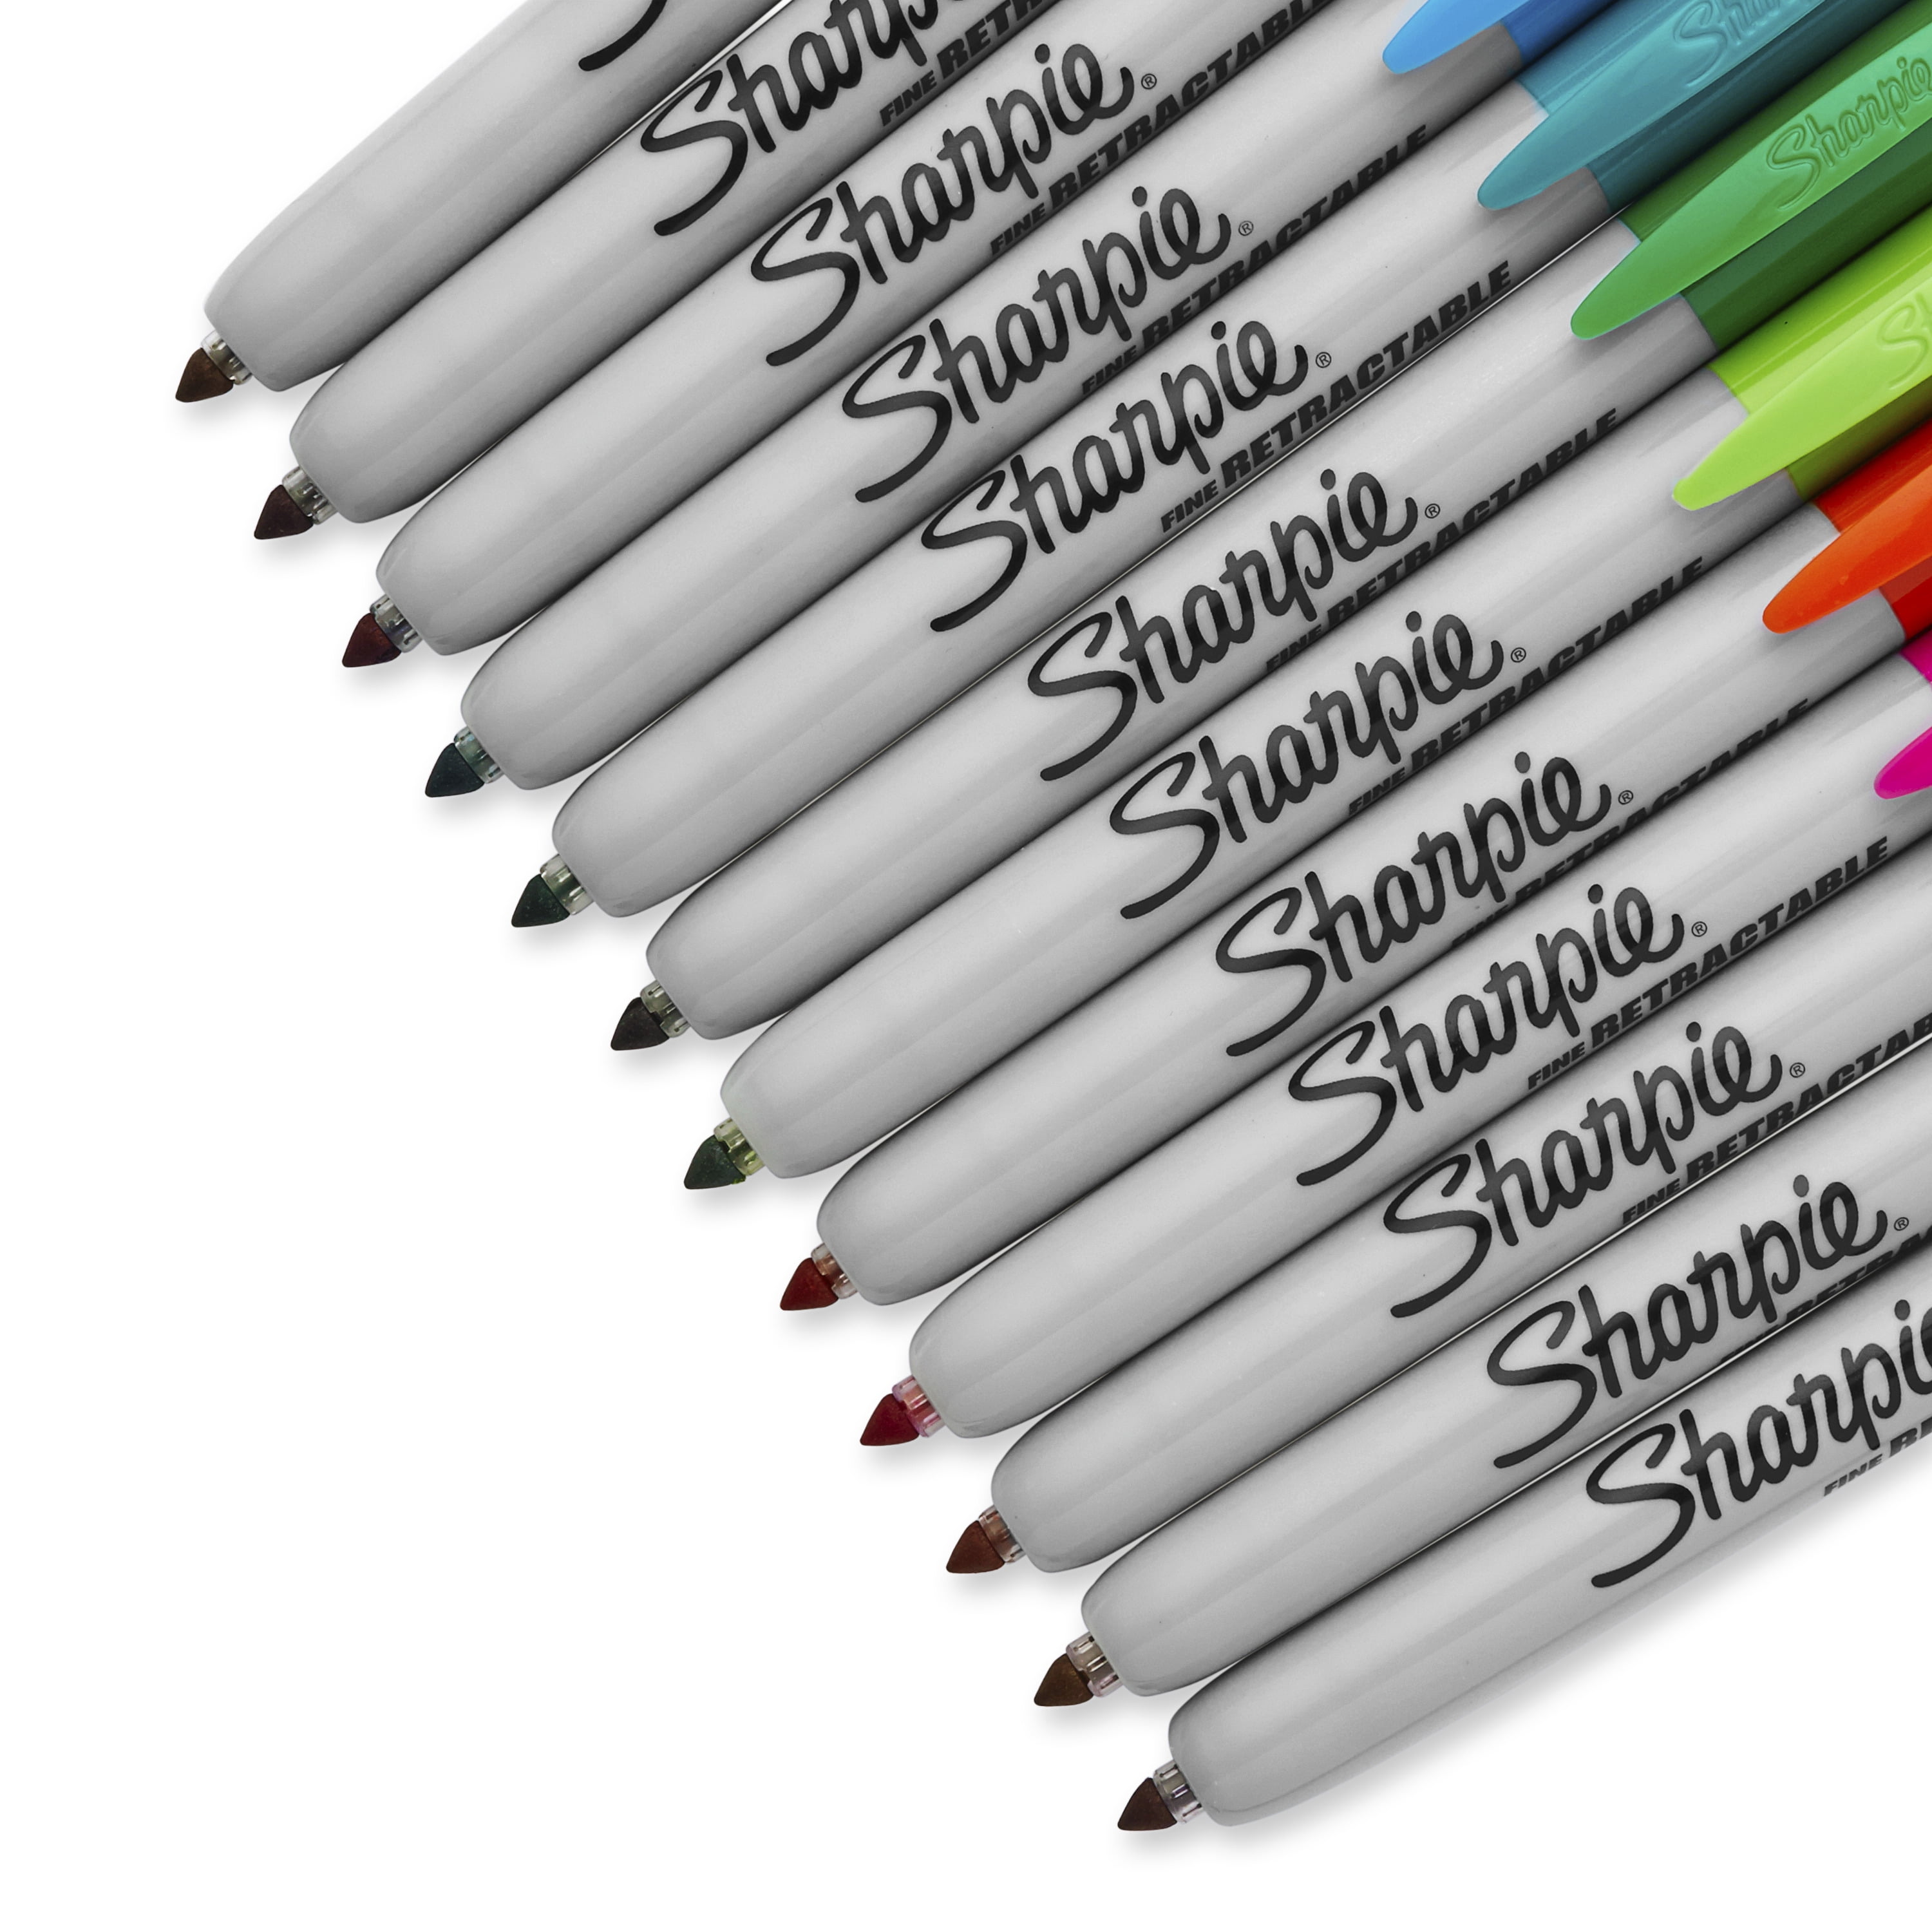 Sharpie Retractable Marker Pens - Assorted Colours (Blister of 4